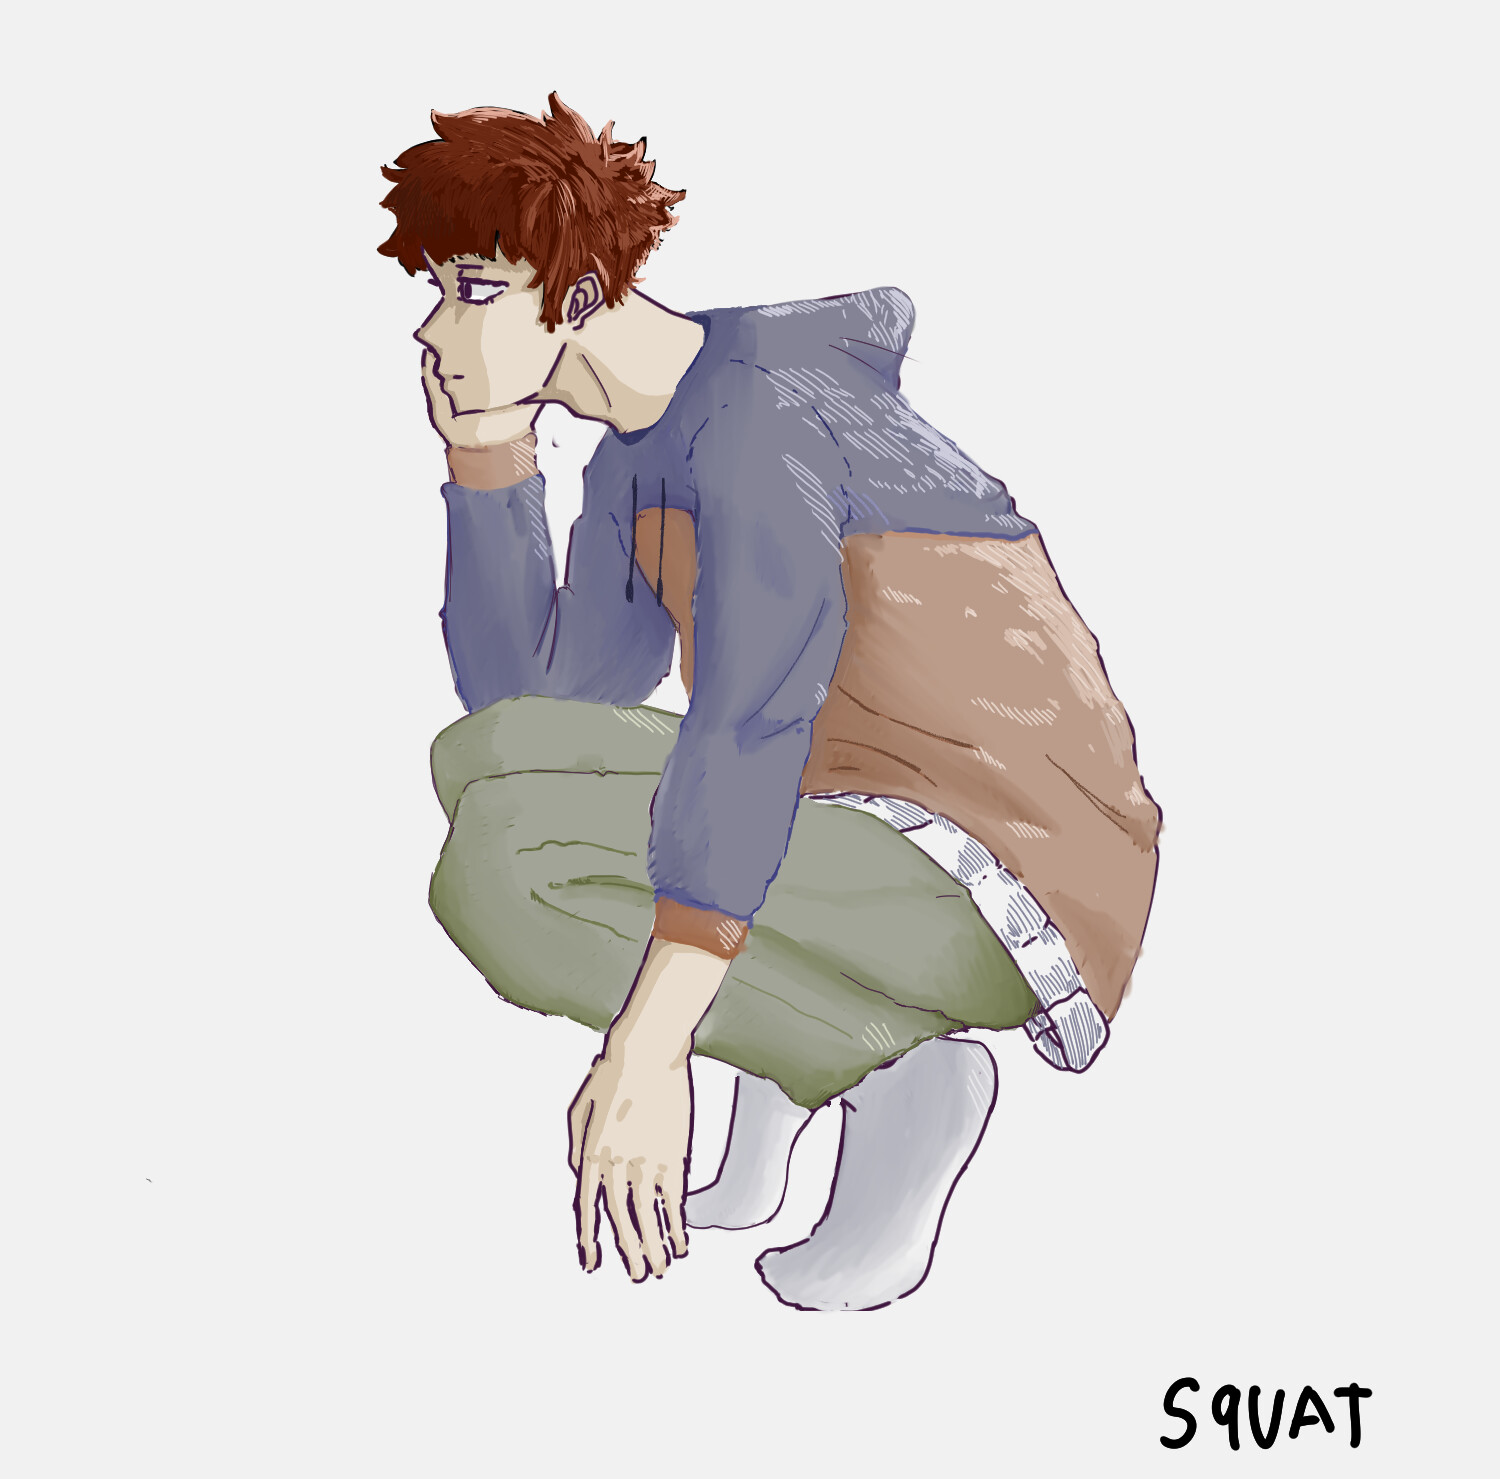 Squatting Drawing Reference and Sketches for Artists